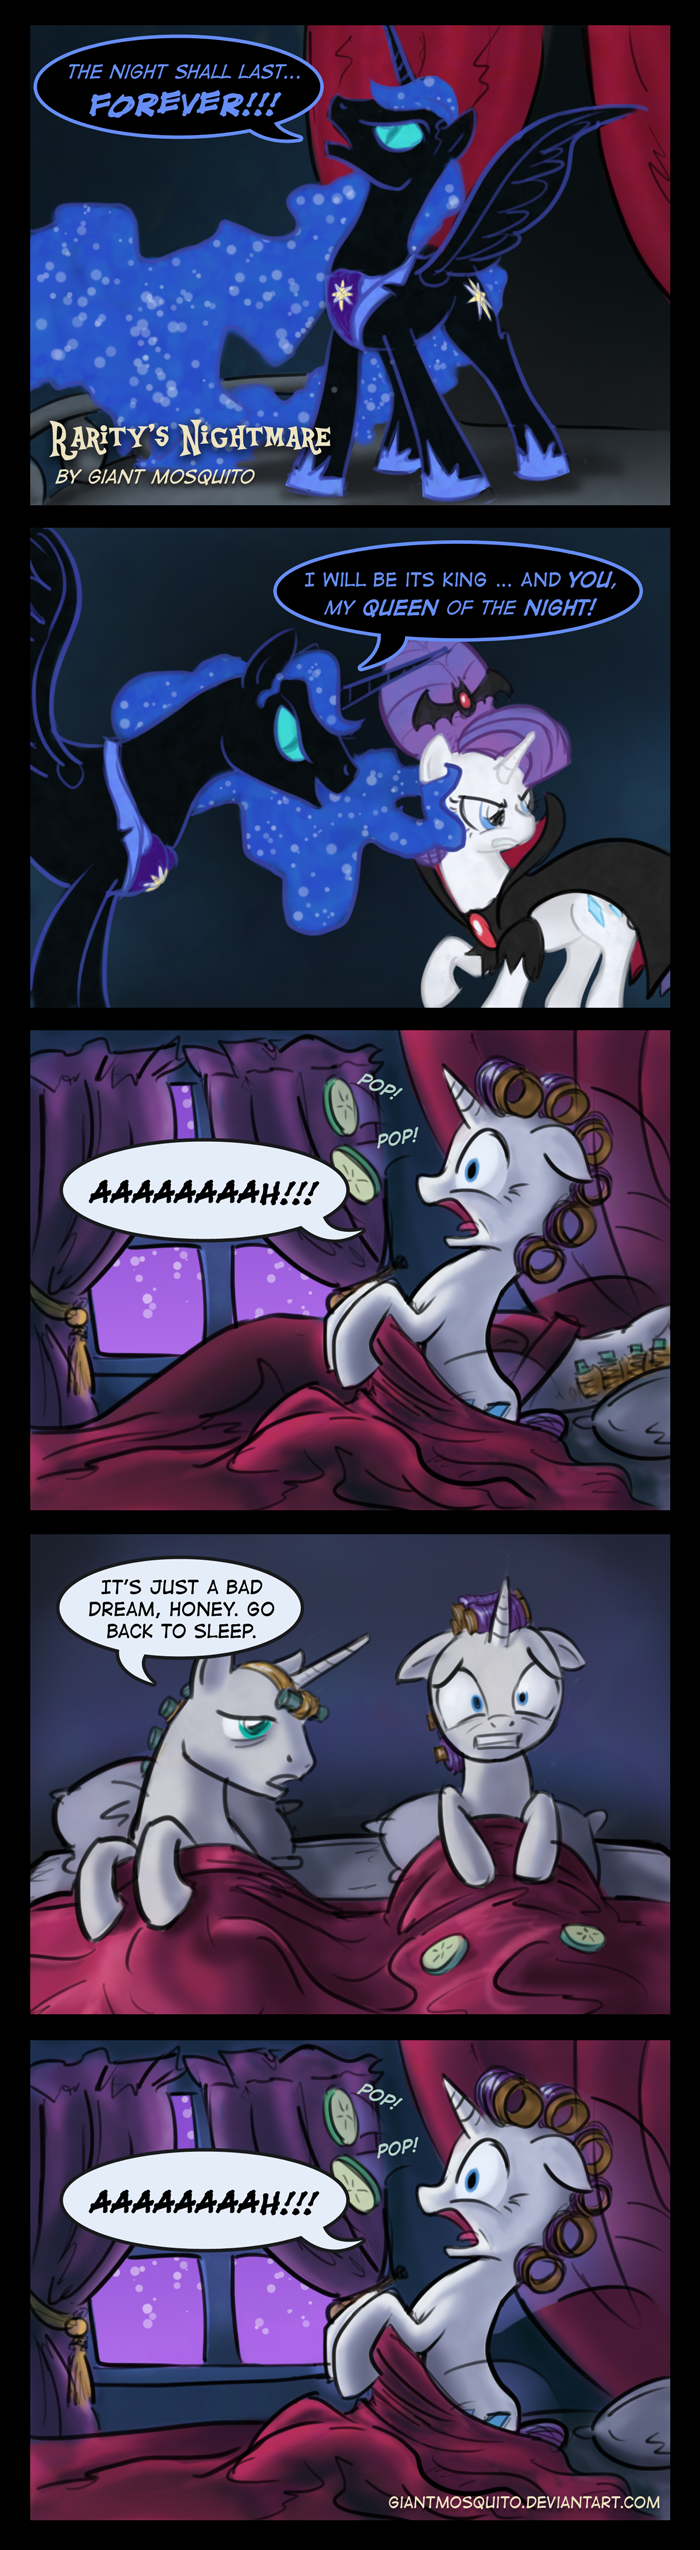 [Obrázek: rarity_s_nightmare_by_giantmosquito-d4gpxb4.png]